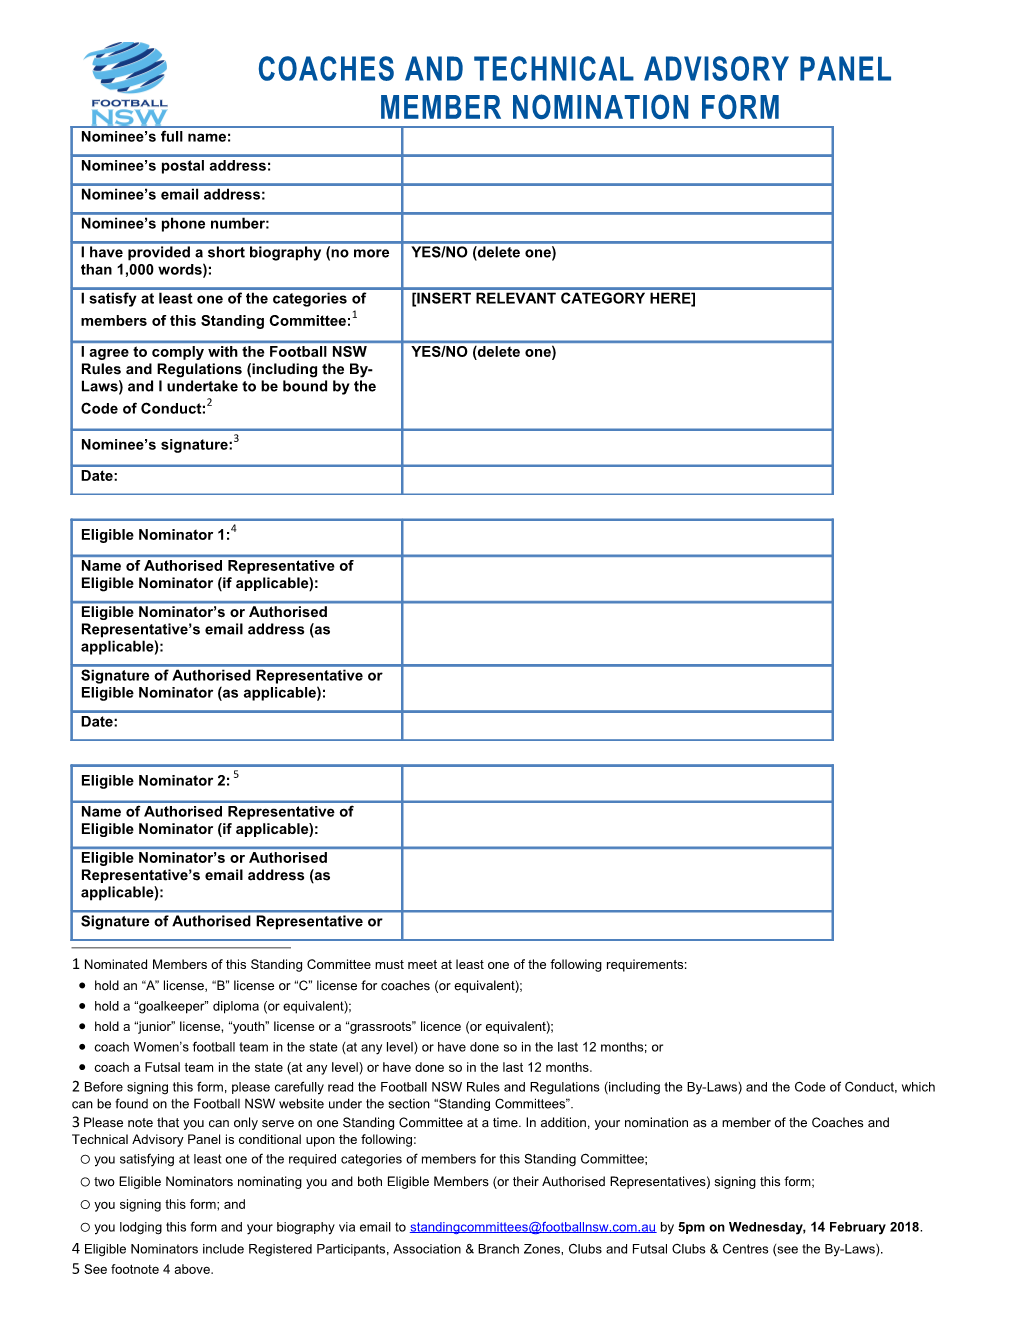 National Soccer League Standard Player Contract Registration Form